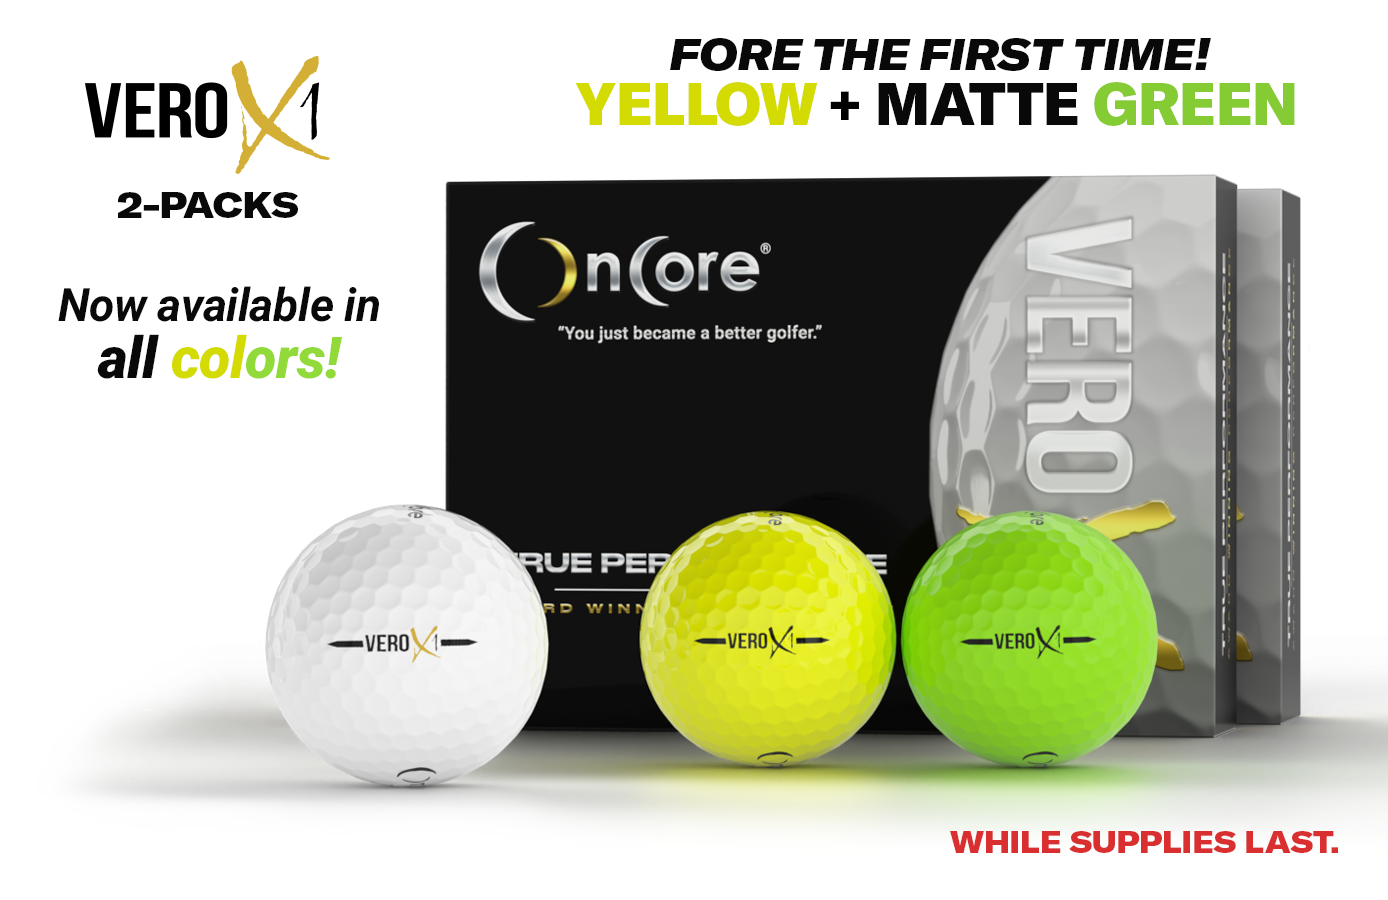 VERO X1 - 2 Dozen Golf Balls Pack - Special Bundles in New Colors from OnCore!